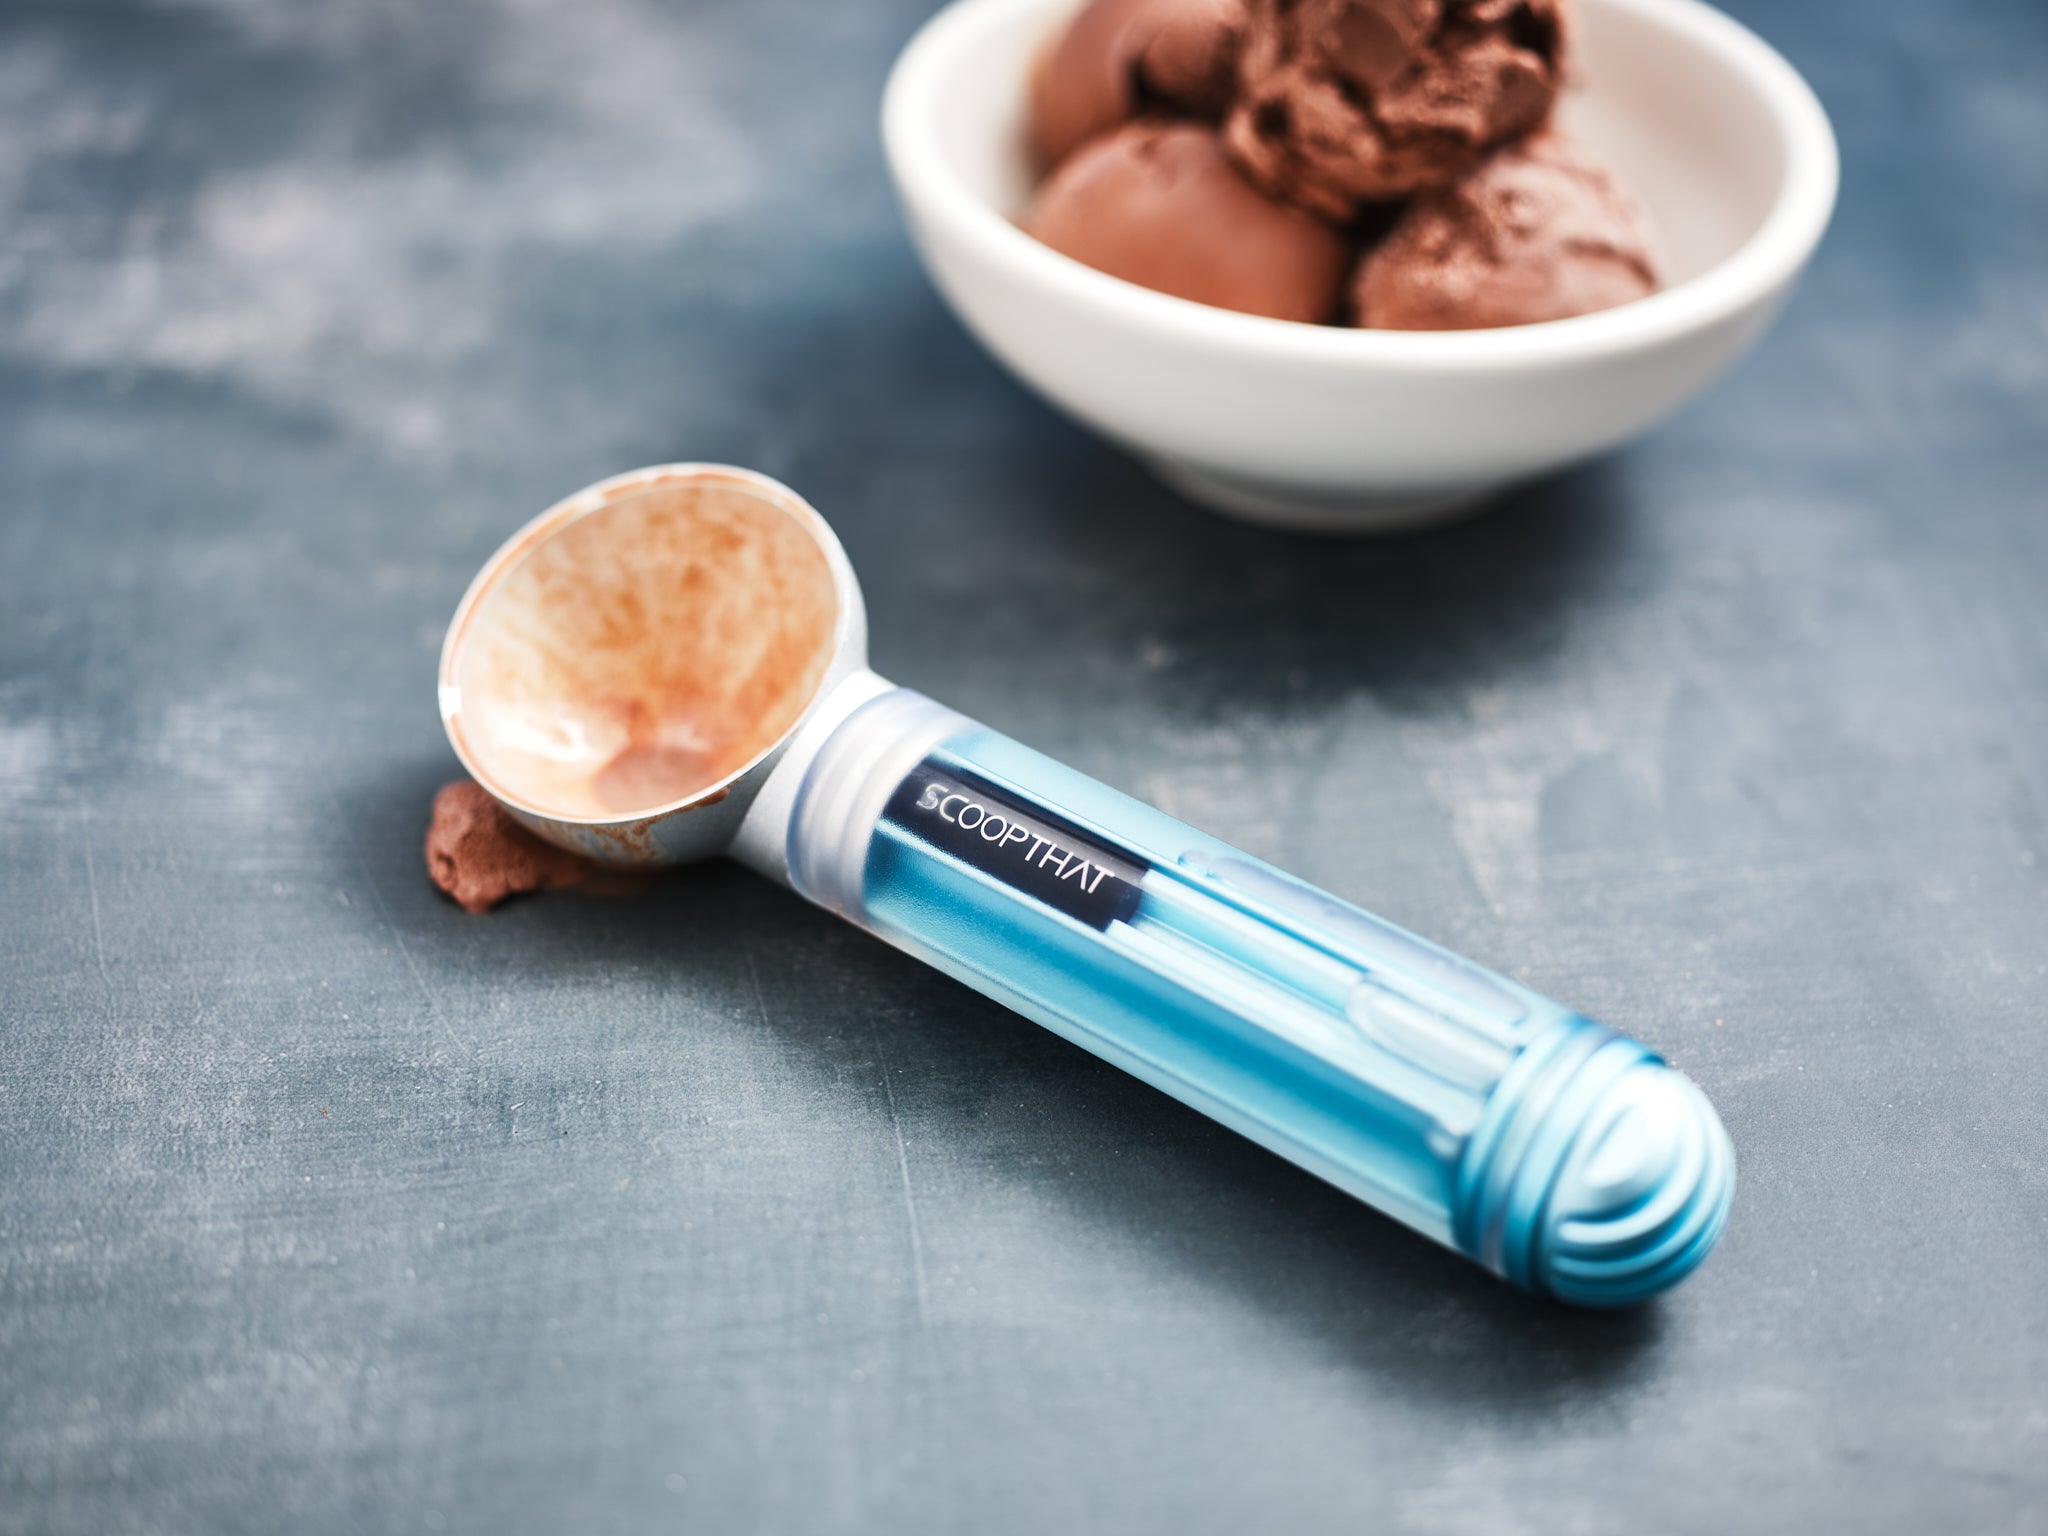 Heated Thermo-Ring Ice Cream Scoop